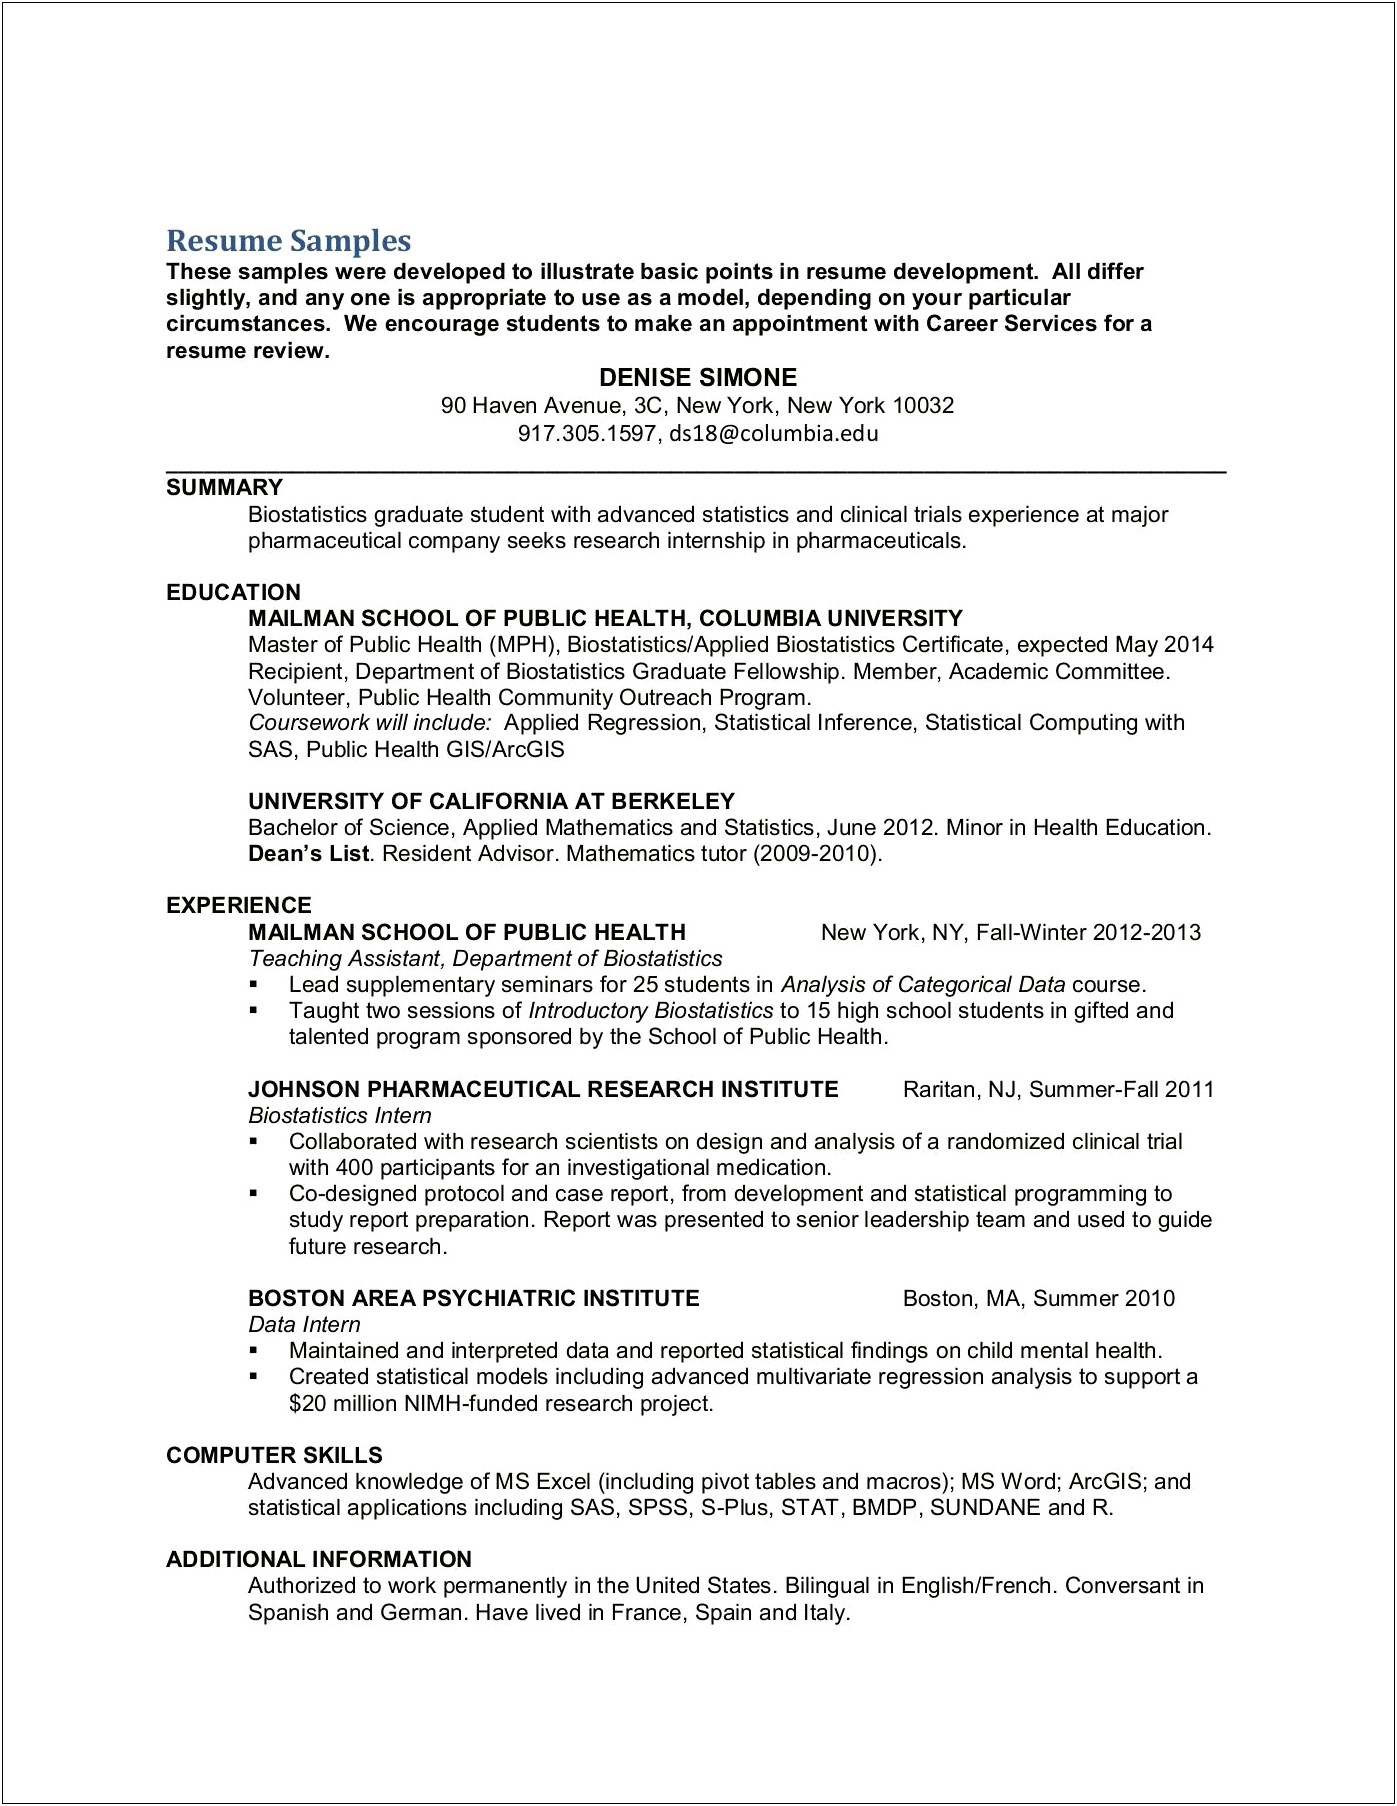 Columbia Research Presentation In Resume Sample